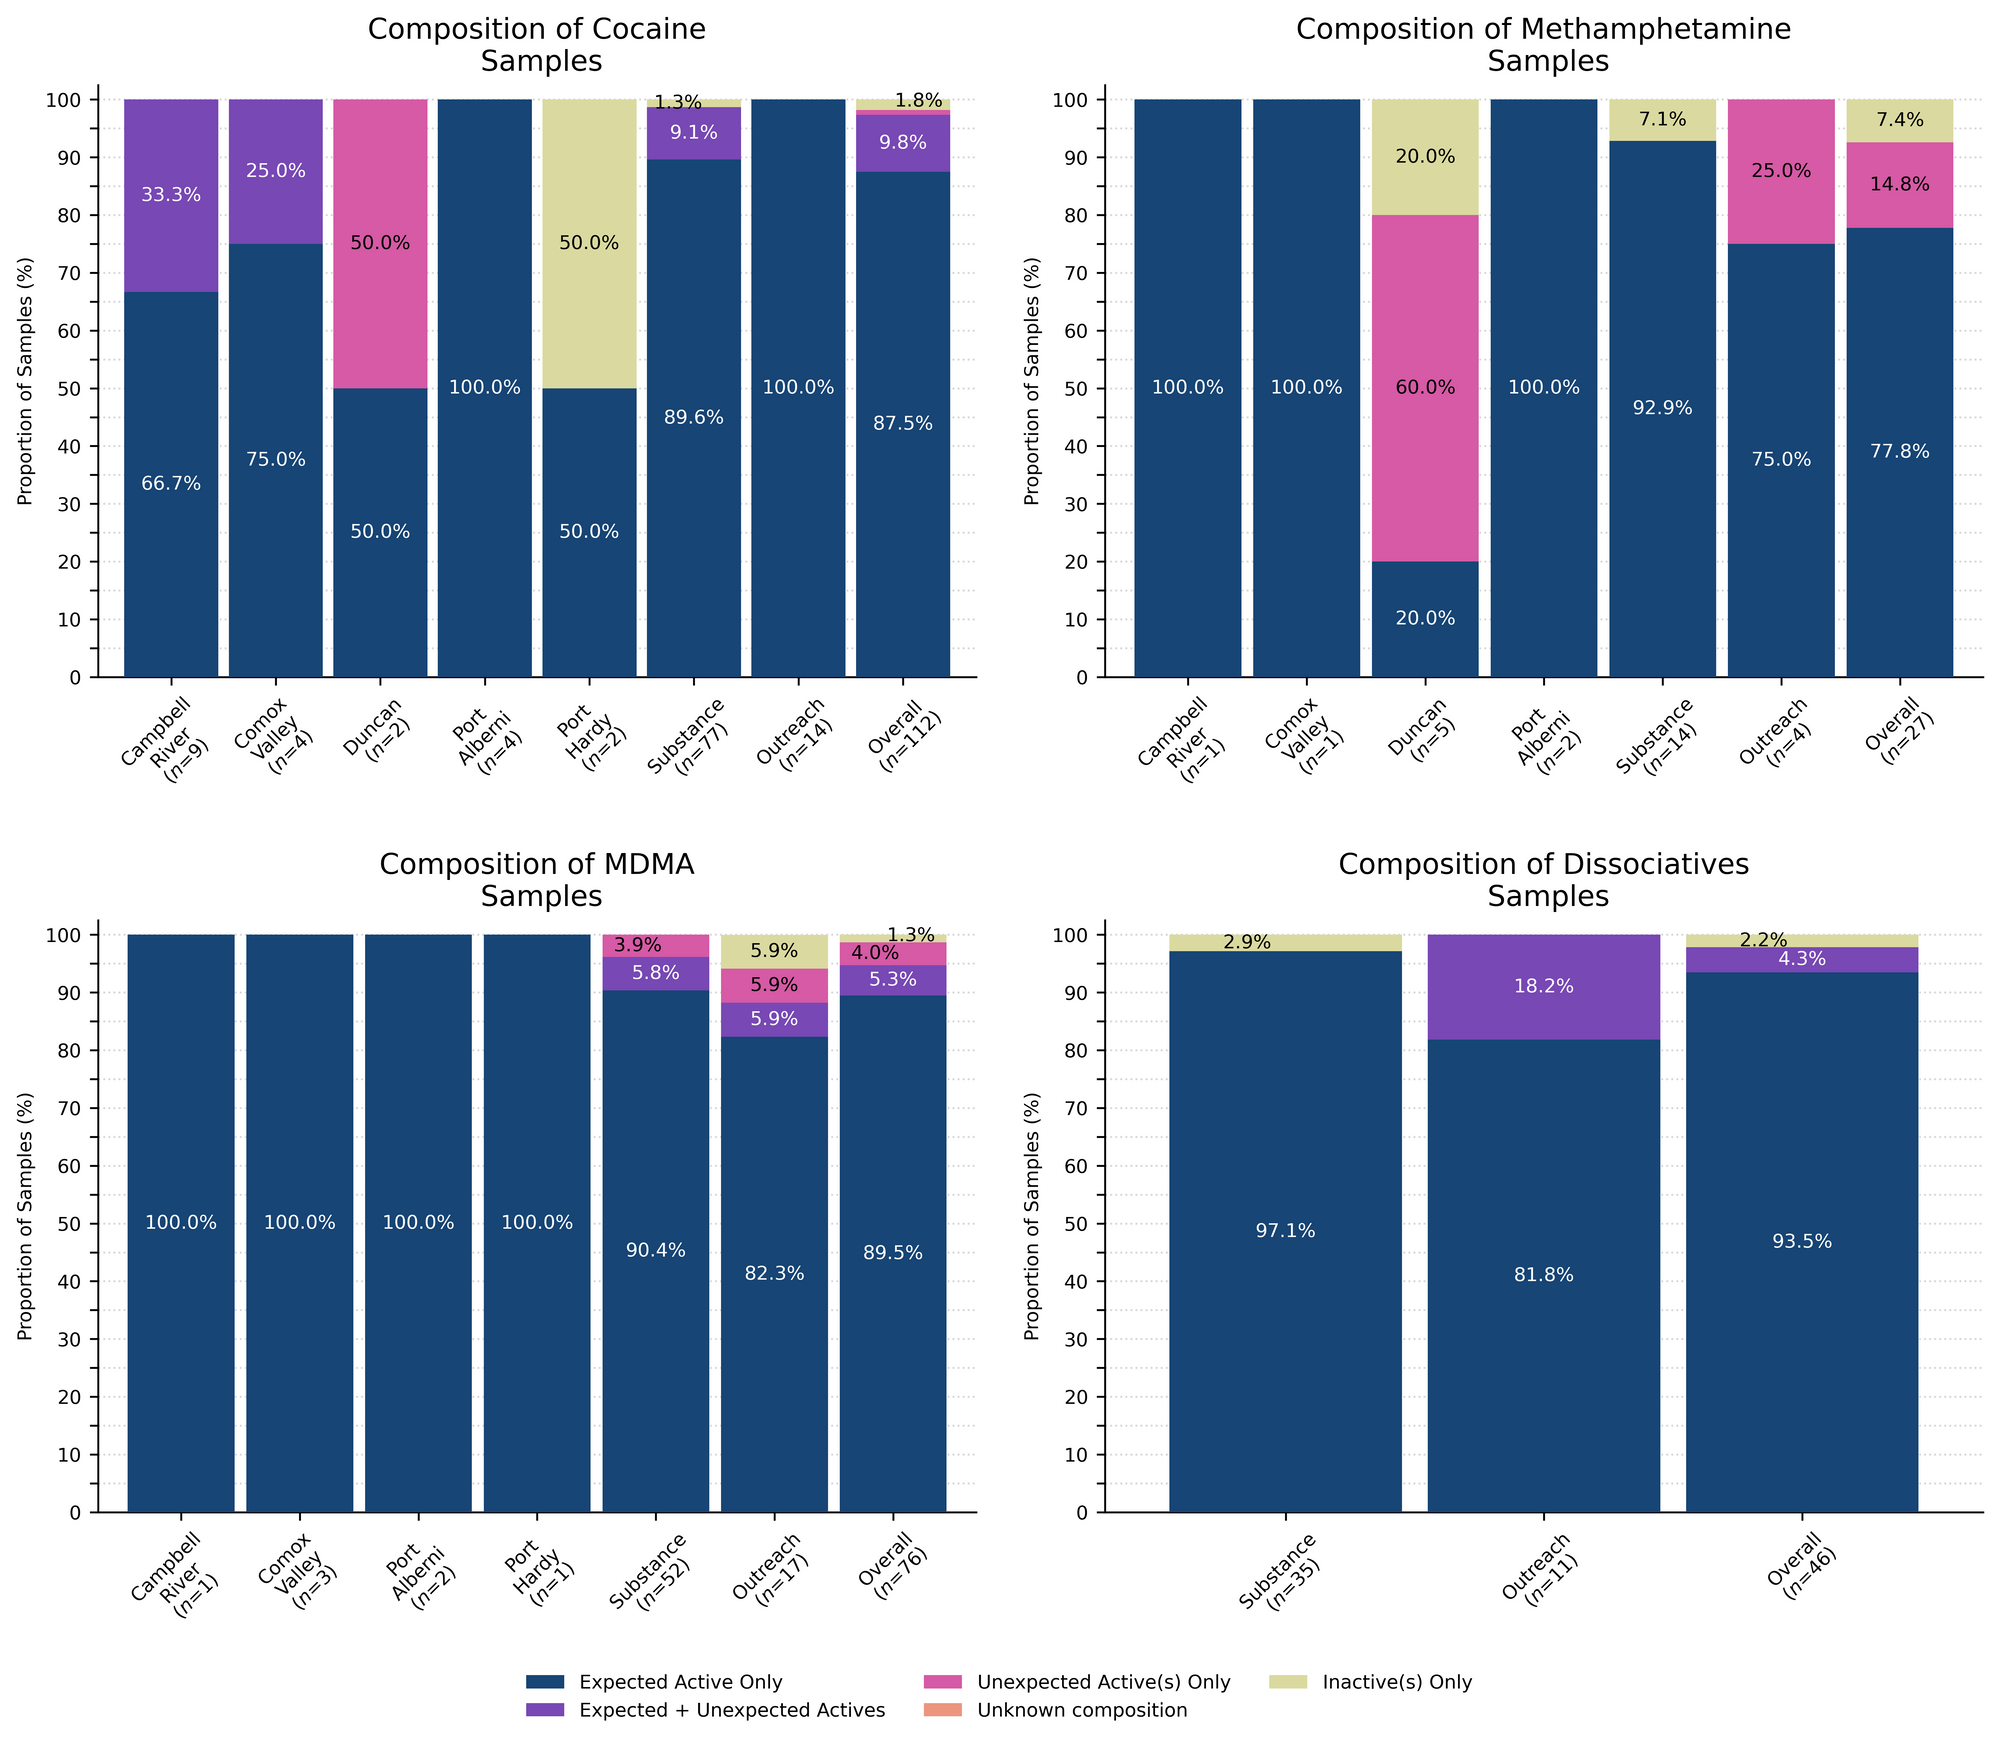 Figure 2. Compositional breakdown by drug class and sample collection location/method. Bars are stacked by the percentage of samples in each category, with the relative proportions overlaid. Proportions less than 1% are not overlaid for clarity. “Dark Blue” groups samples that were *as expected* with no other notable compounds detected, “Purple” groups samples that contained the expected drug and contained other unexpected active(s), “Magenta” groups samples that did not contain the expected active but did contain unexpected active(s), Salmon groups samples where we were unable to determine the composition (e.g. scenarios where we do not have appropriate reference spectra), and Lime displays samples where no active compounds were detected.